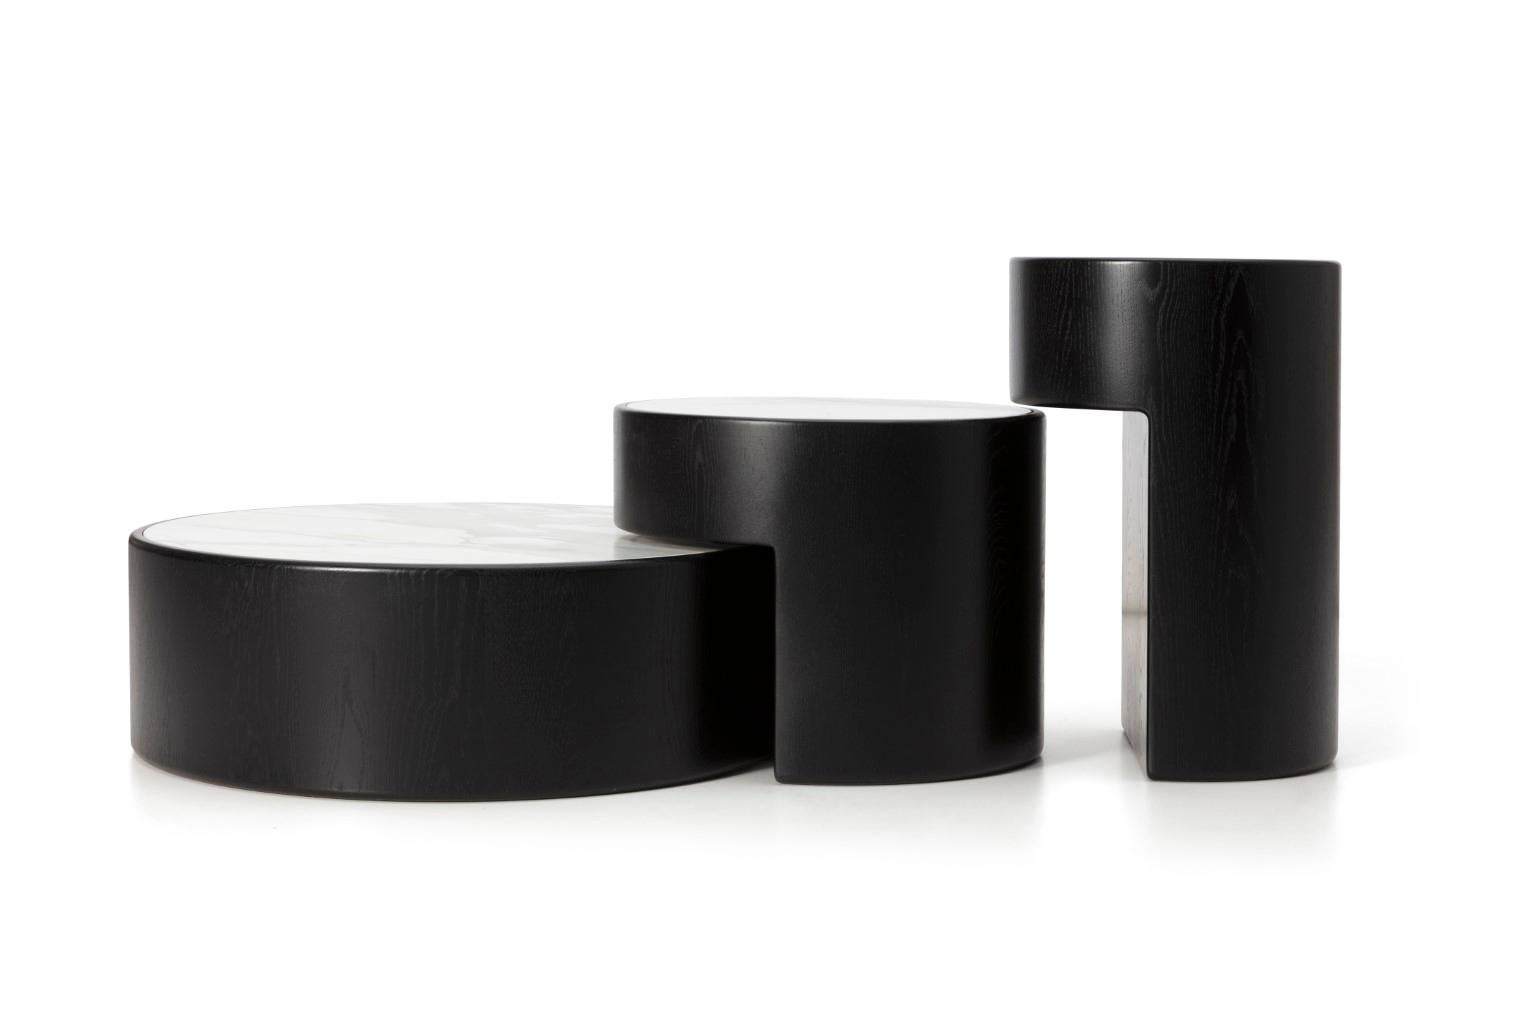 French Levels Set of 3 Nesting Tables by Dan Yeffet & Lucie Koldova For Sale